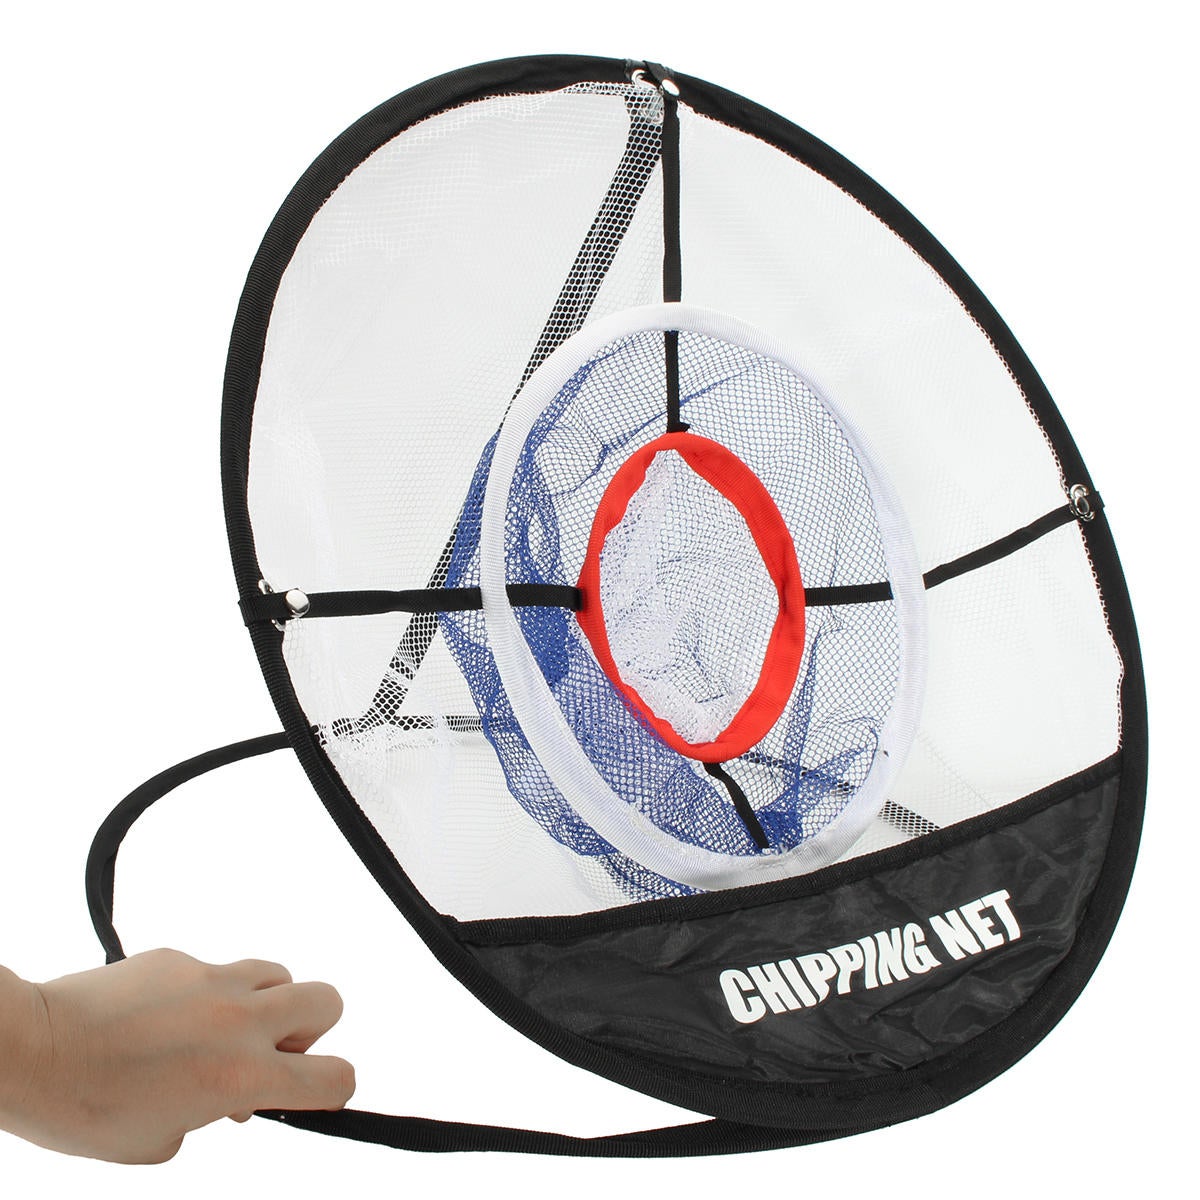 Golf Chipping Pitching Practice Net Hitting Cage Outdoor Training Aid Tools